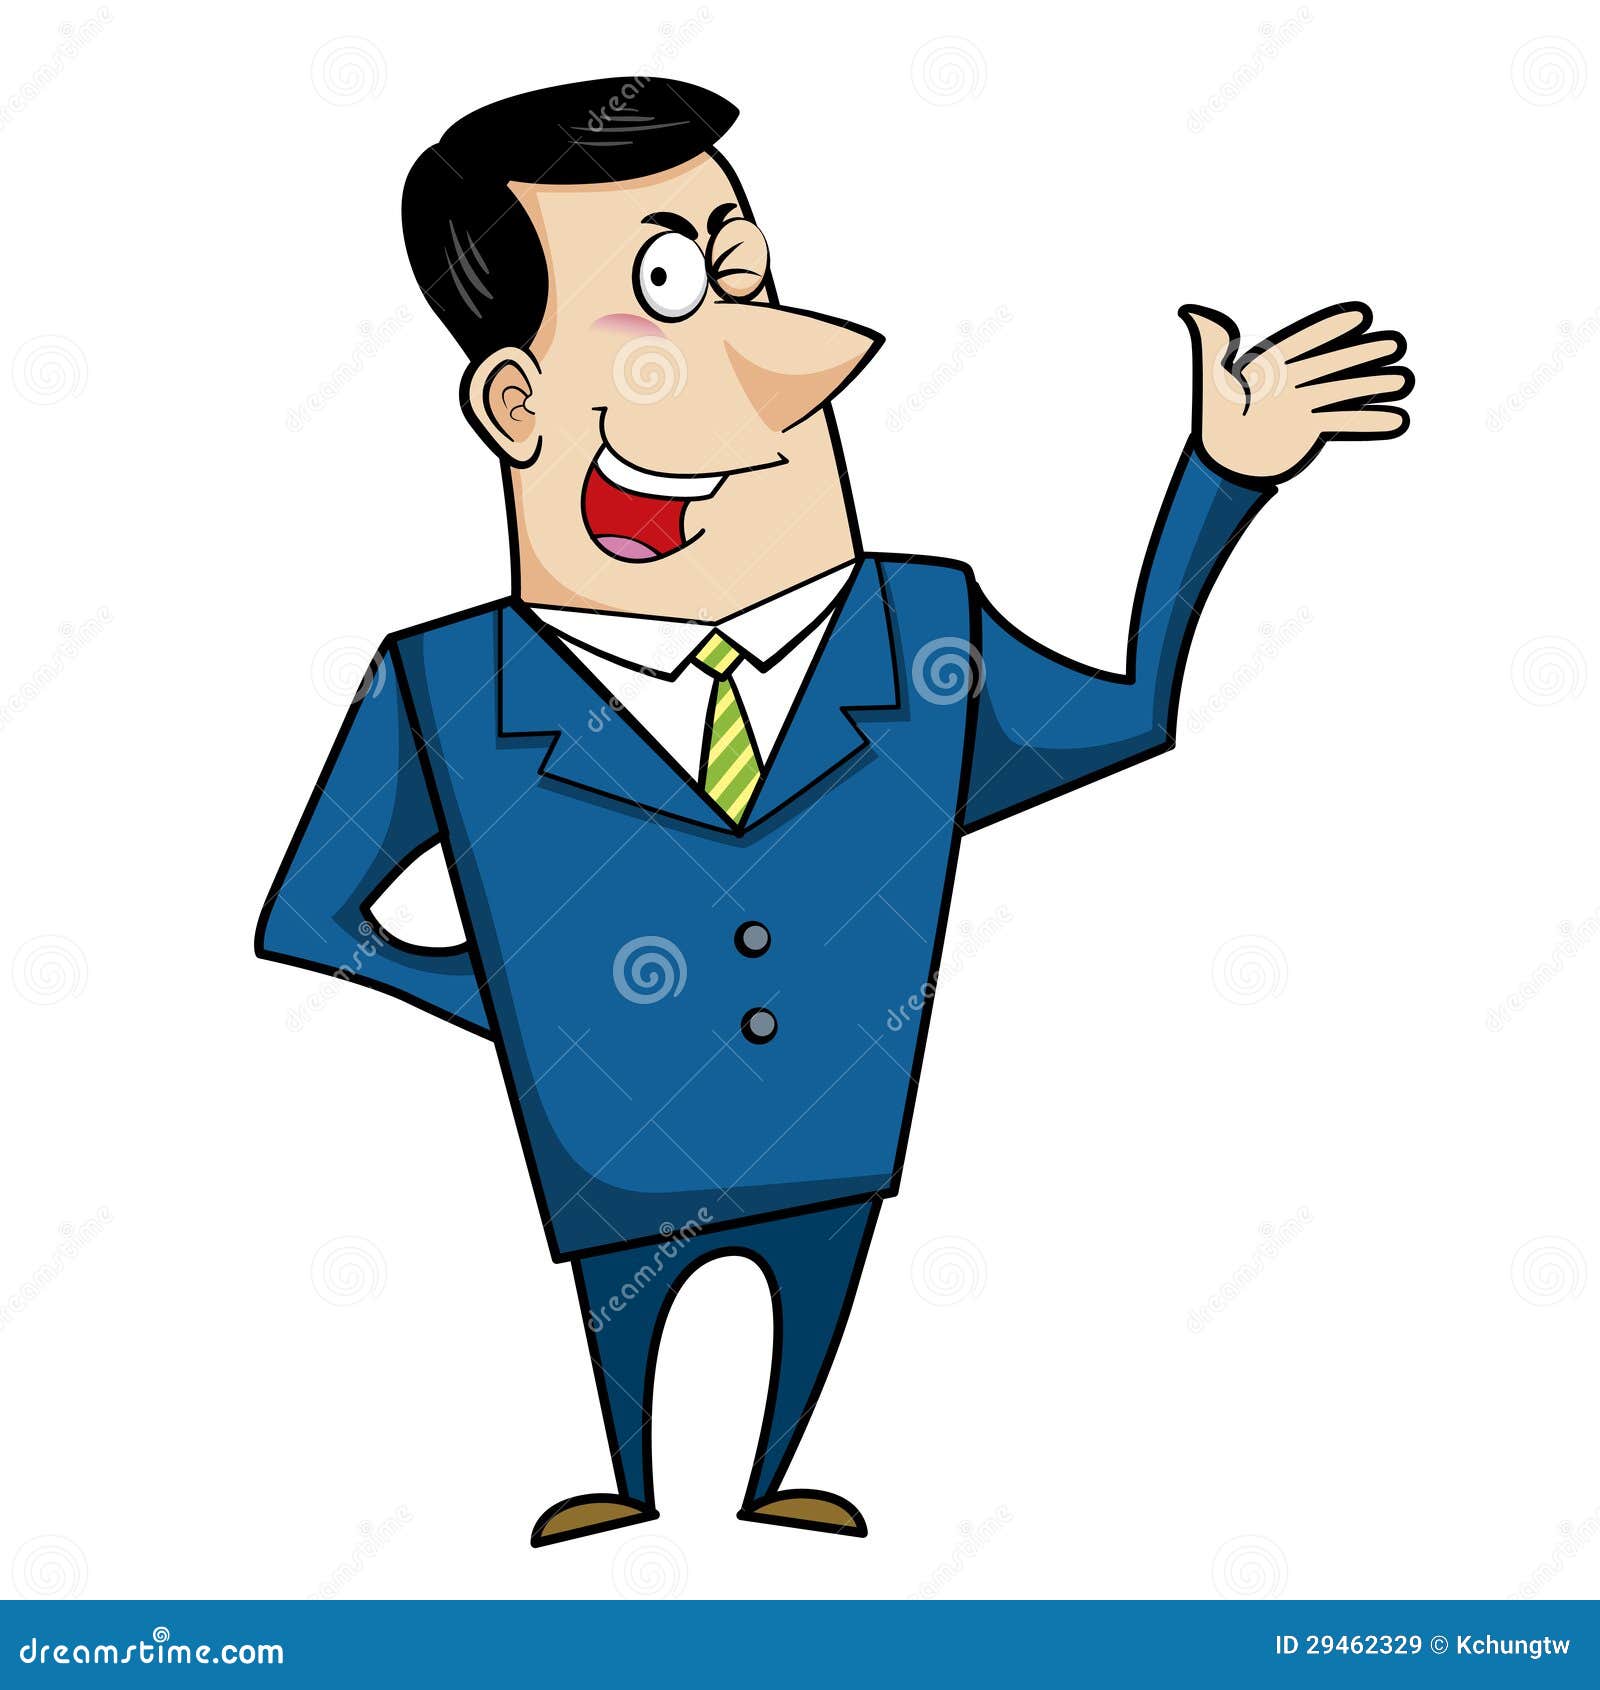 Cartoon business man stock vector. Illustration of laughing - 29462329